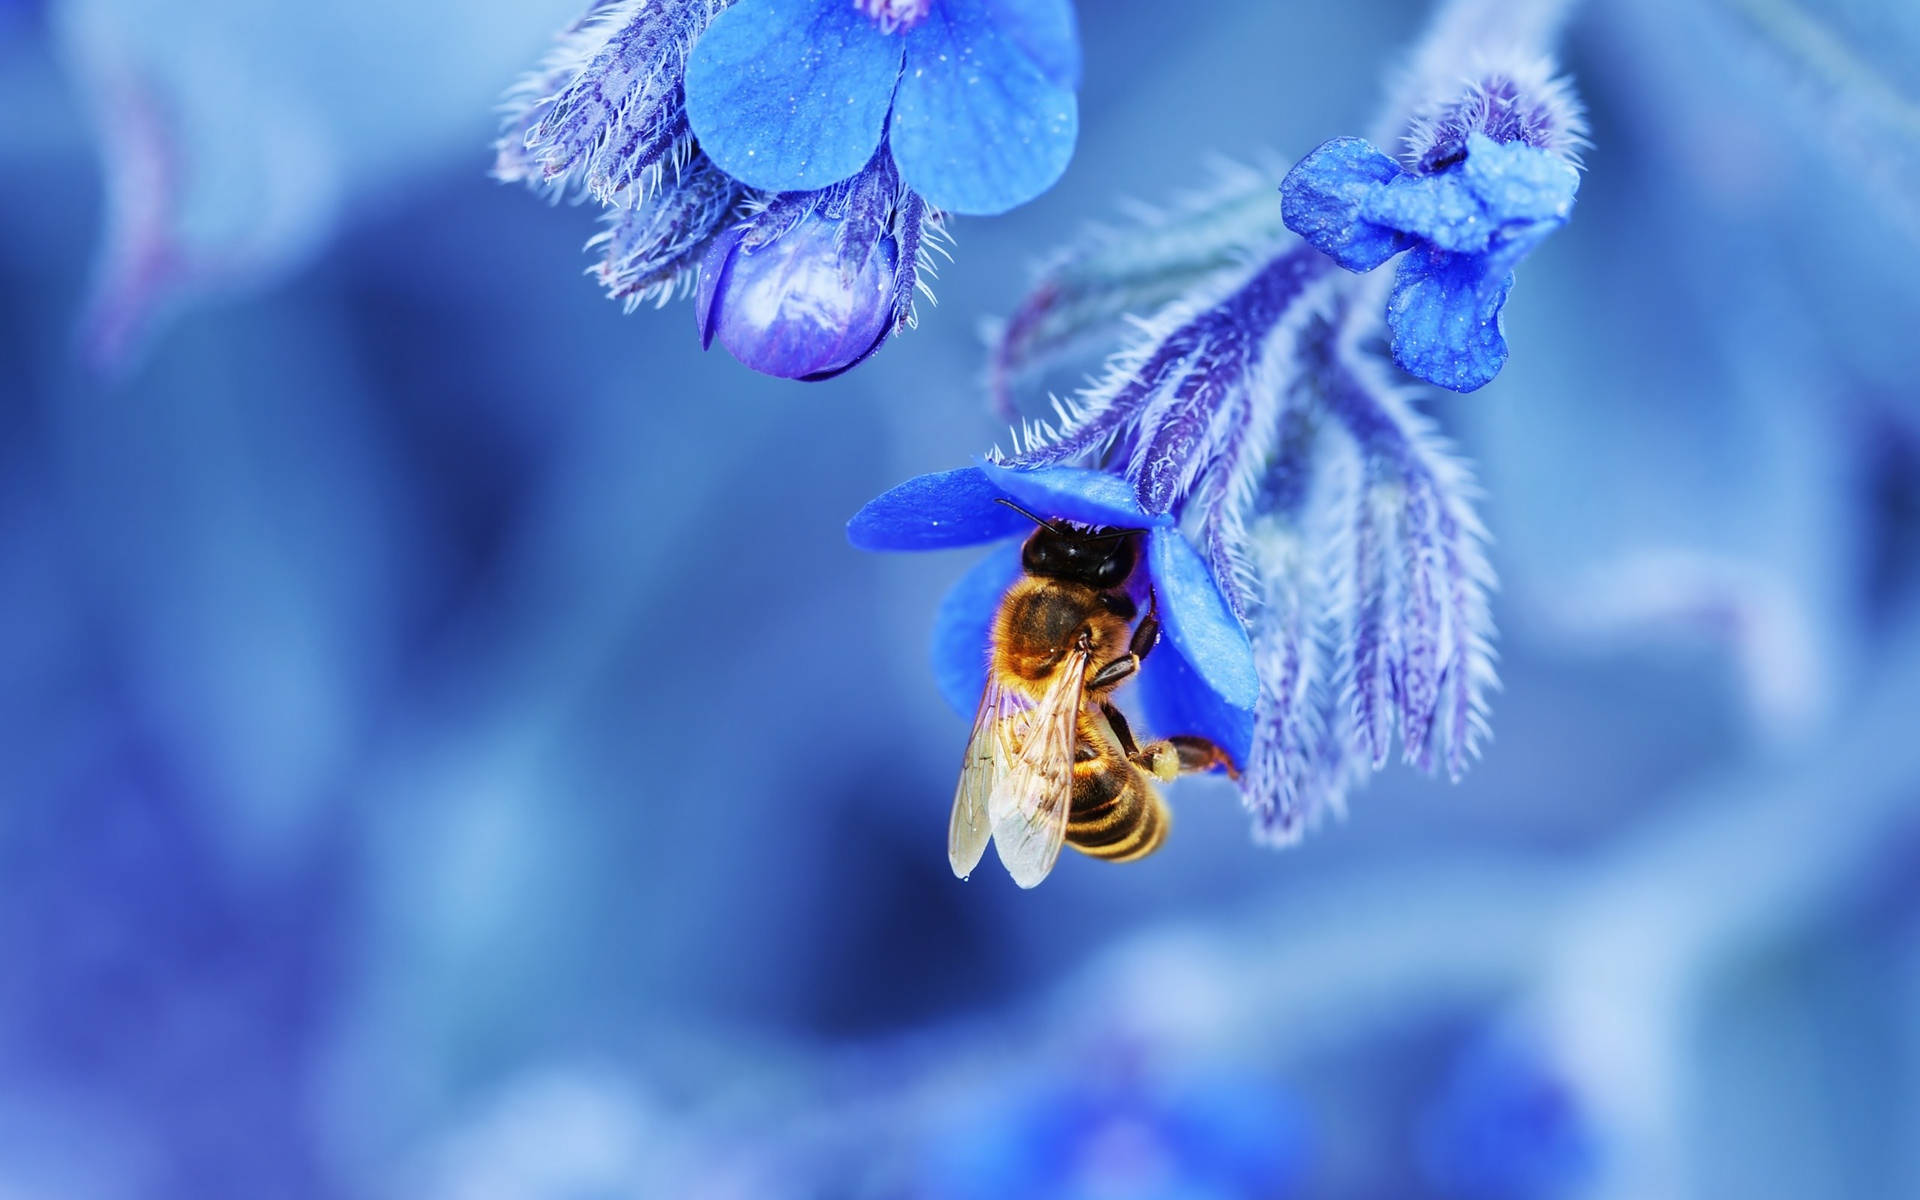 Insect Bee On Blue Flower Wallpaper